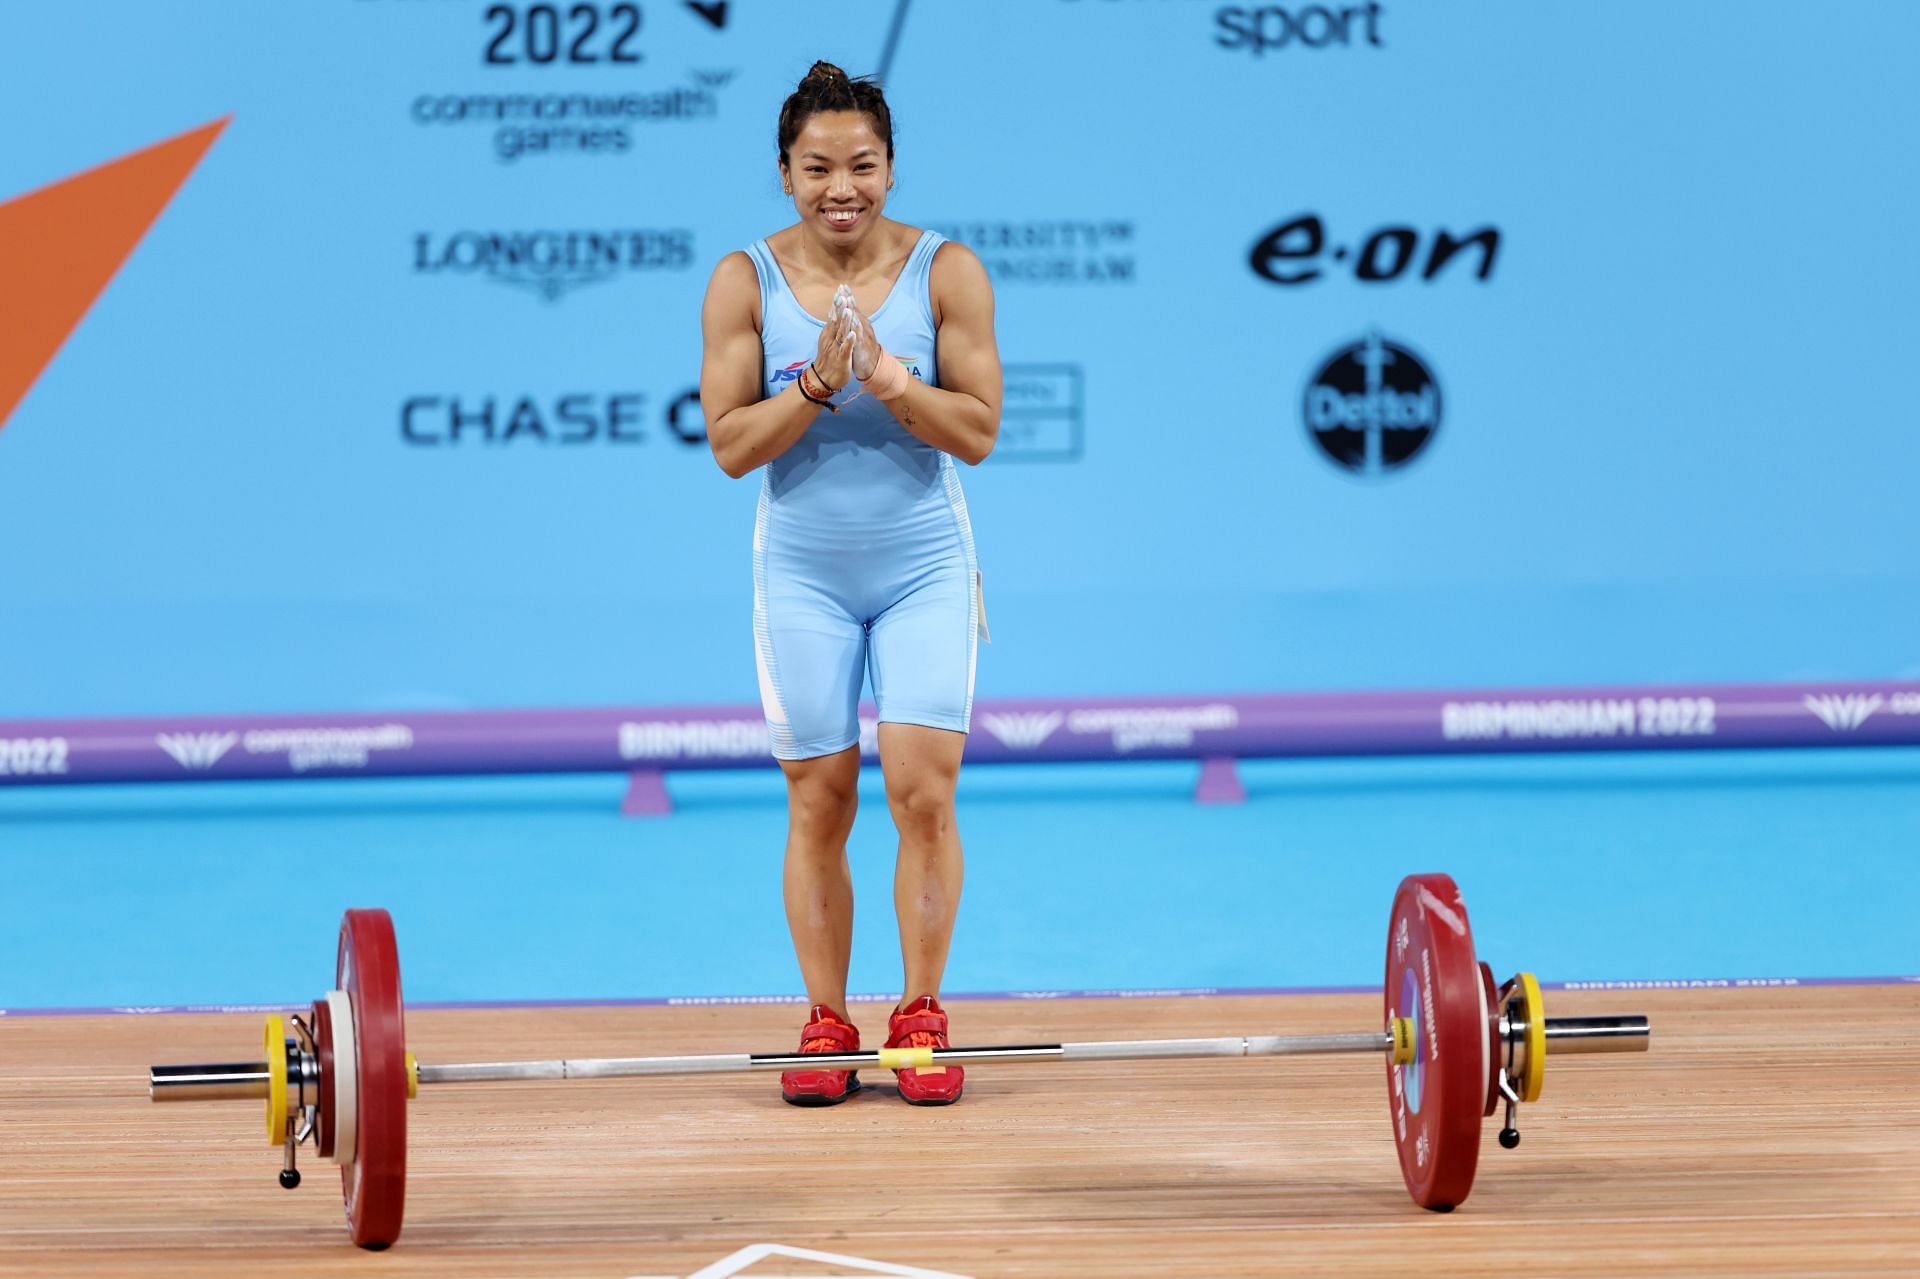 Mirabai Chanu has made the nation proud with her recent performances in weightlifting (Image: Getty)